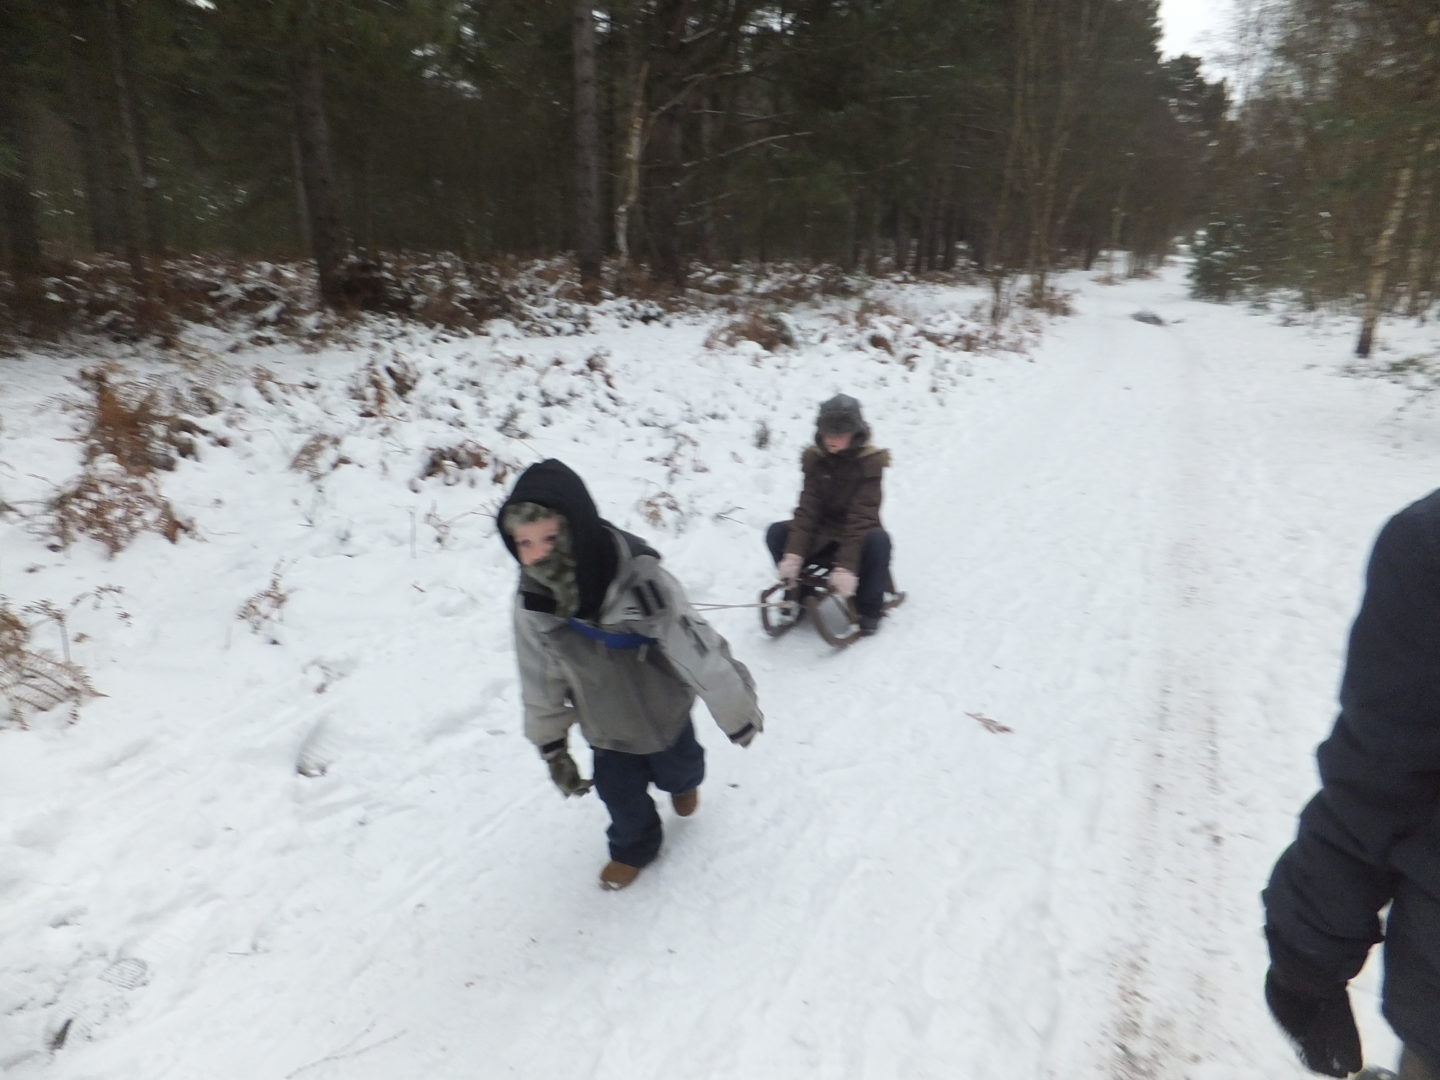 Woodland walks can also be woodland sledge rides